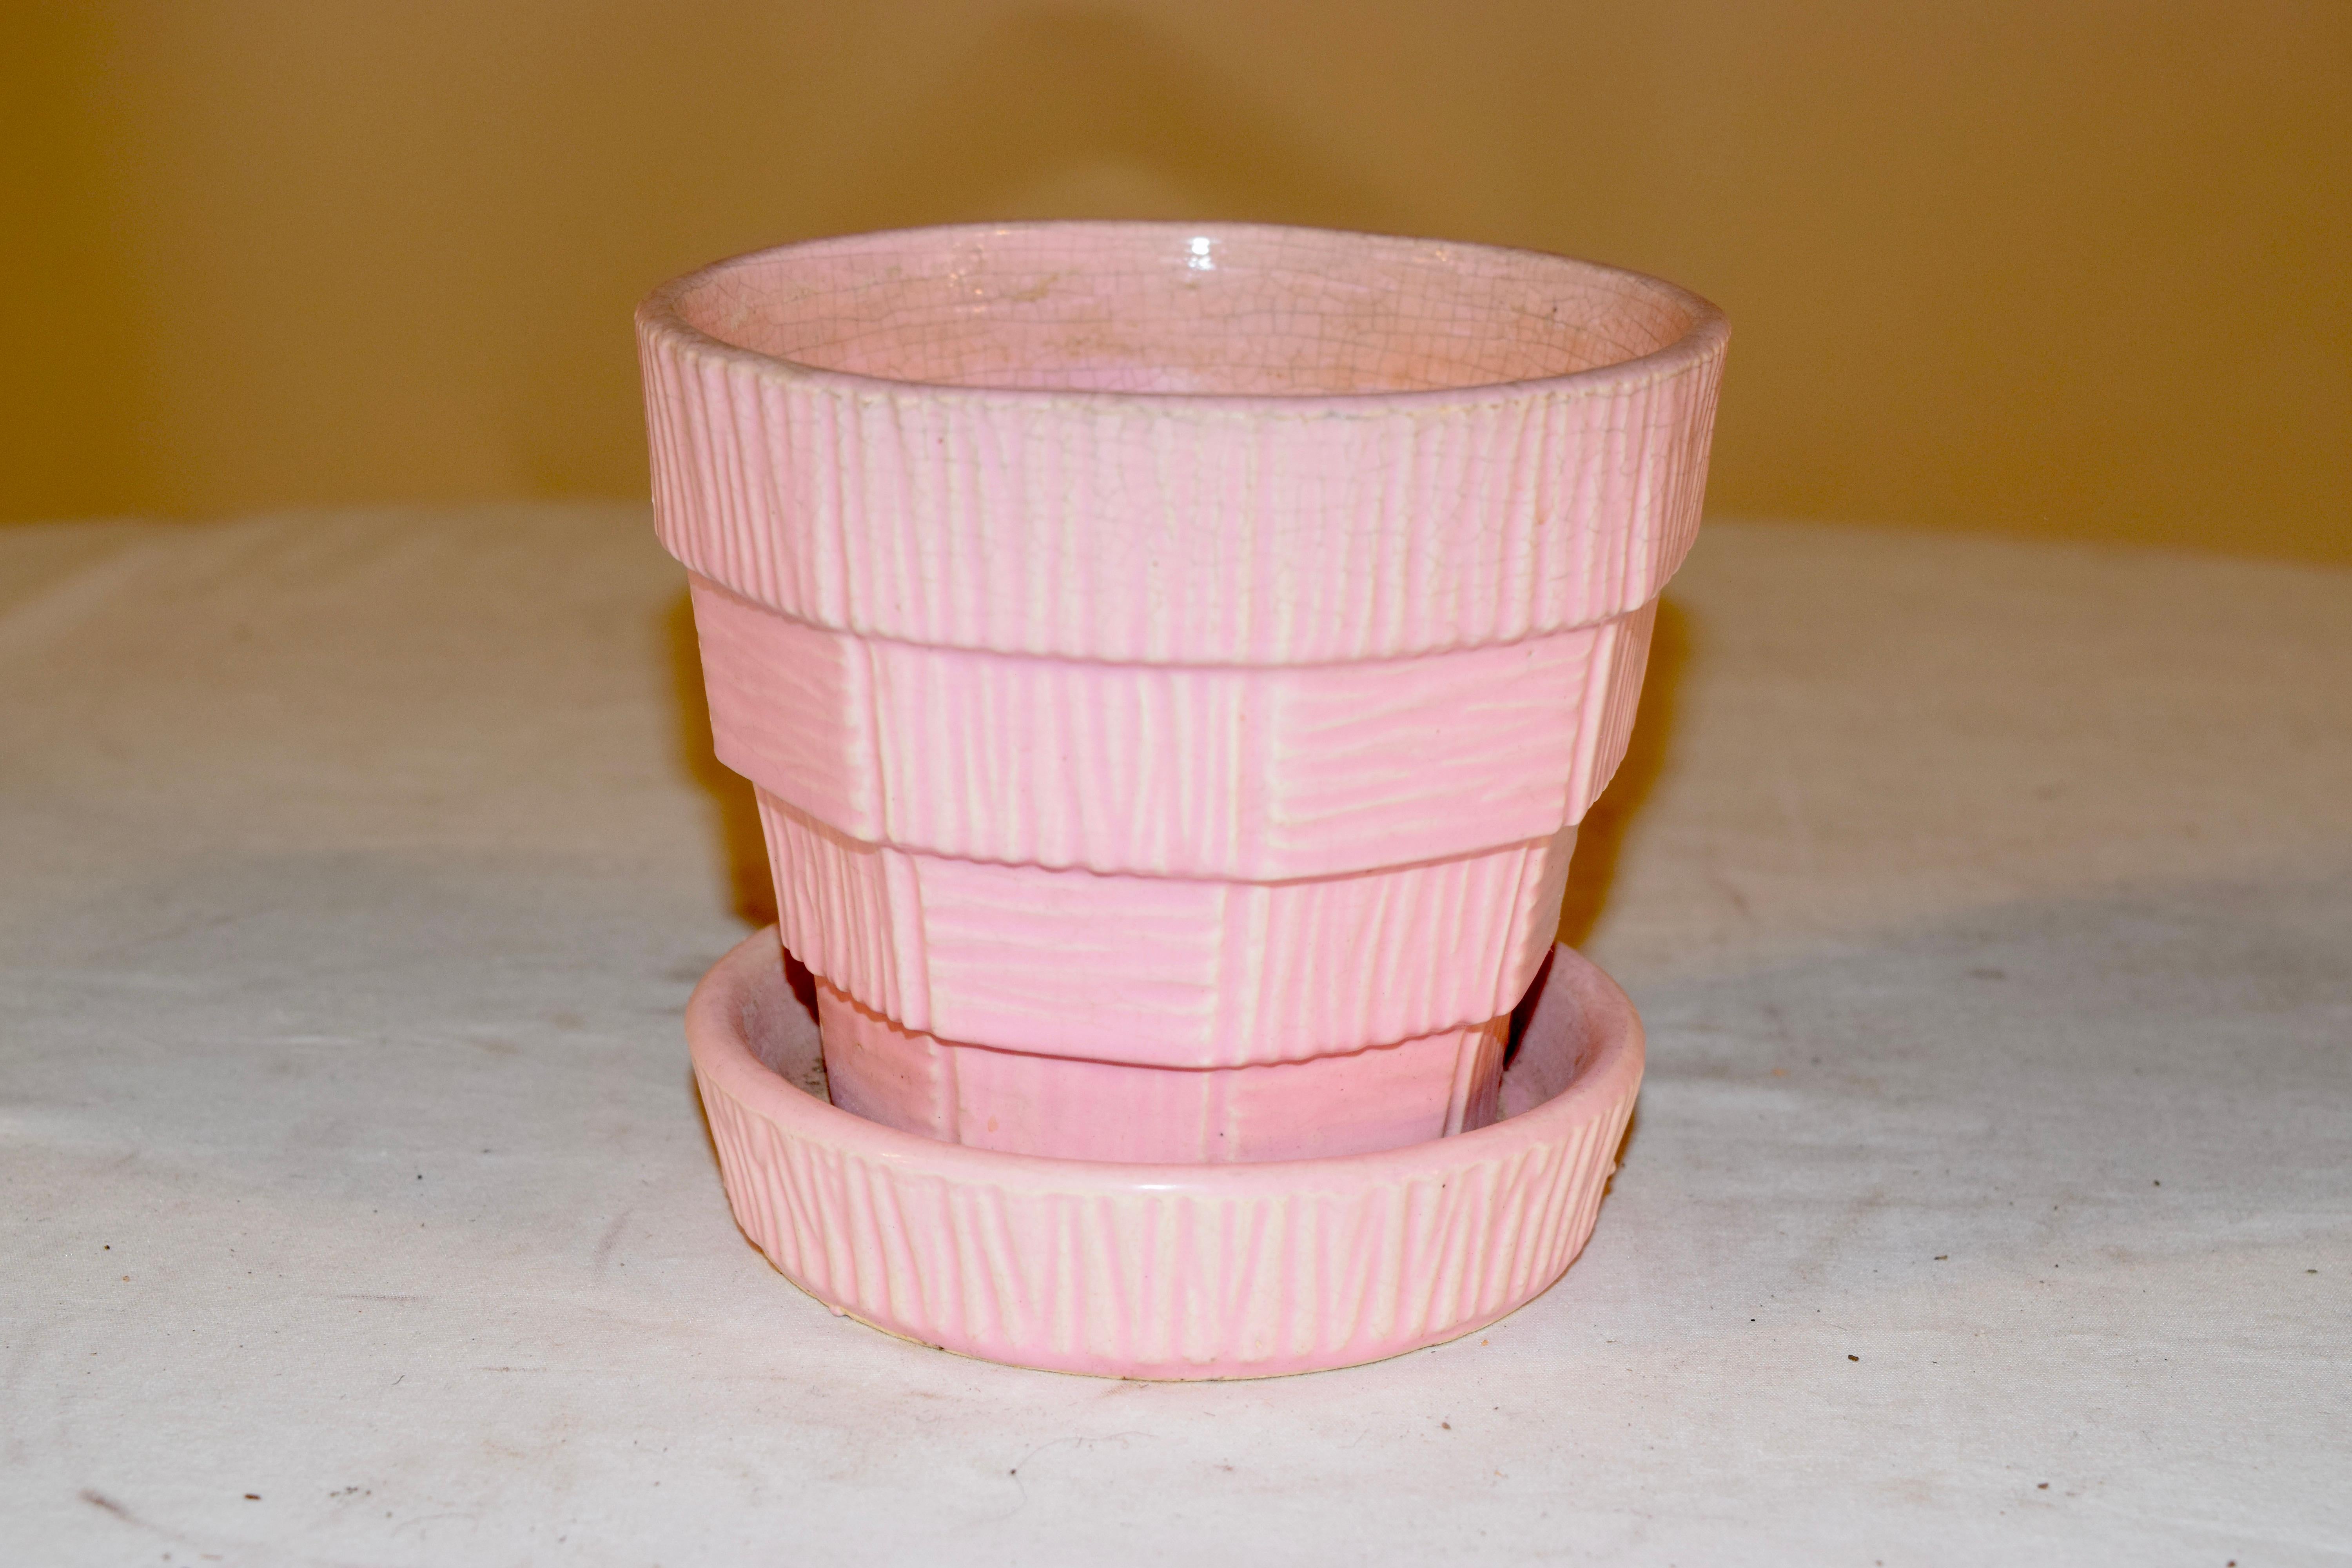 Midcentury McCoy pink flower pot with attached saucer, which also has a water drain built in. Nicely patterned and tiered pattern.